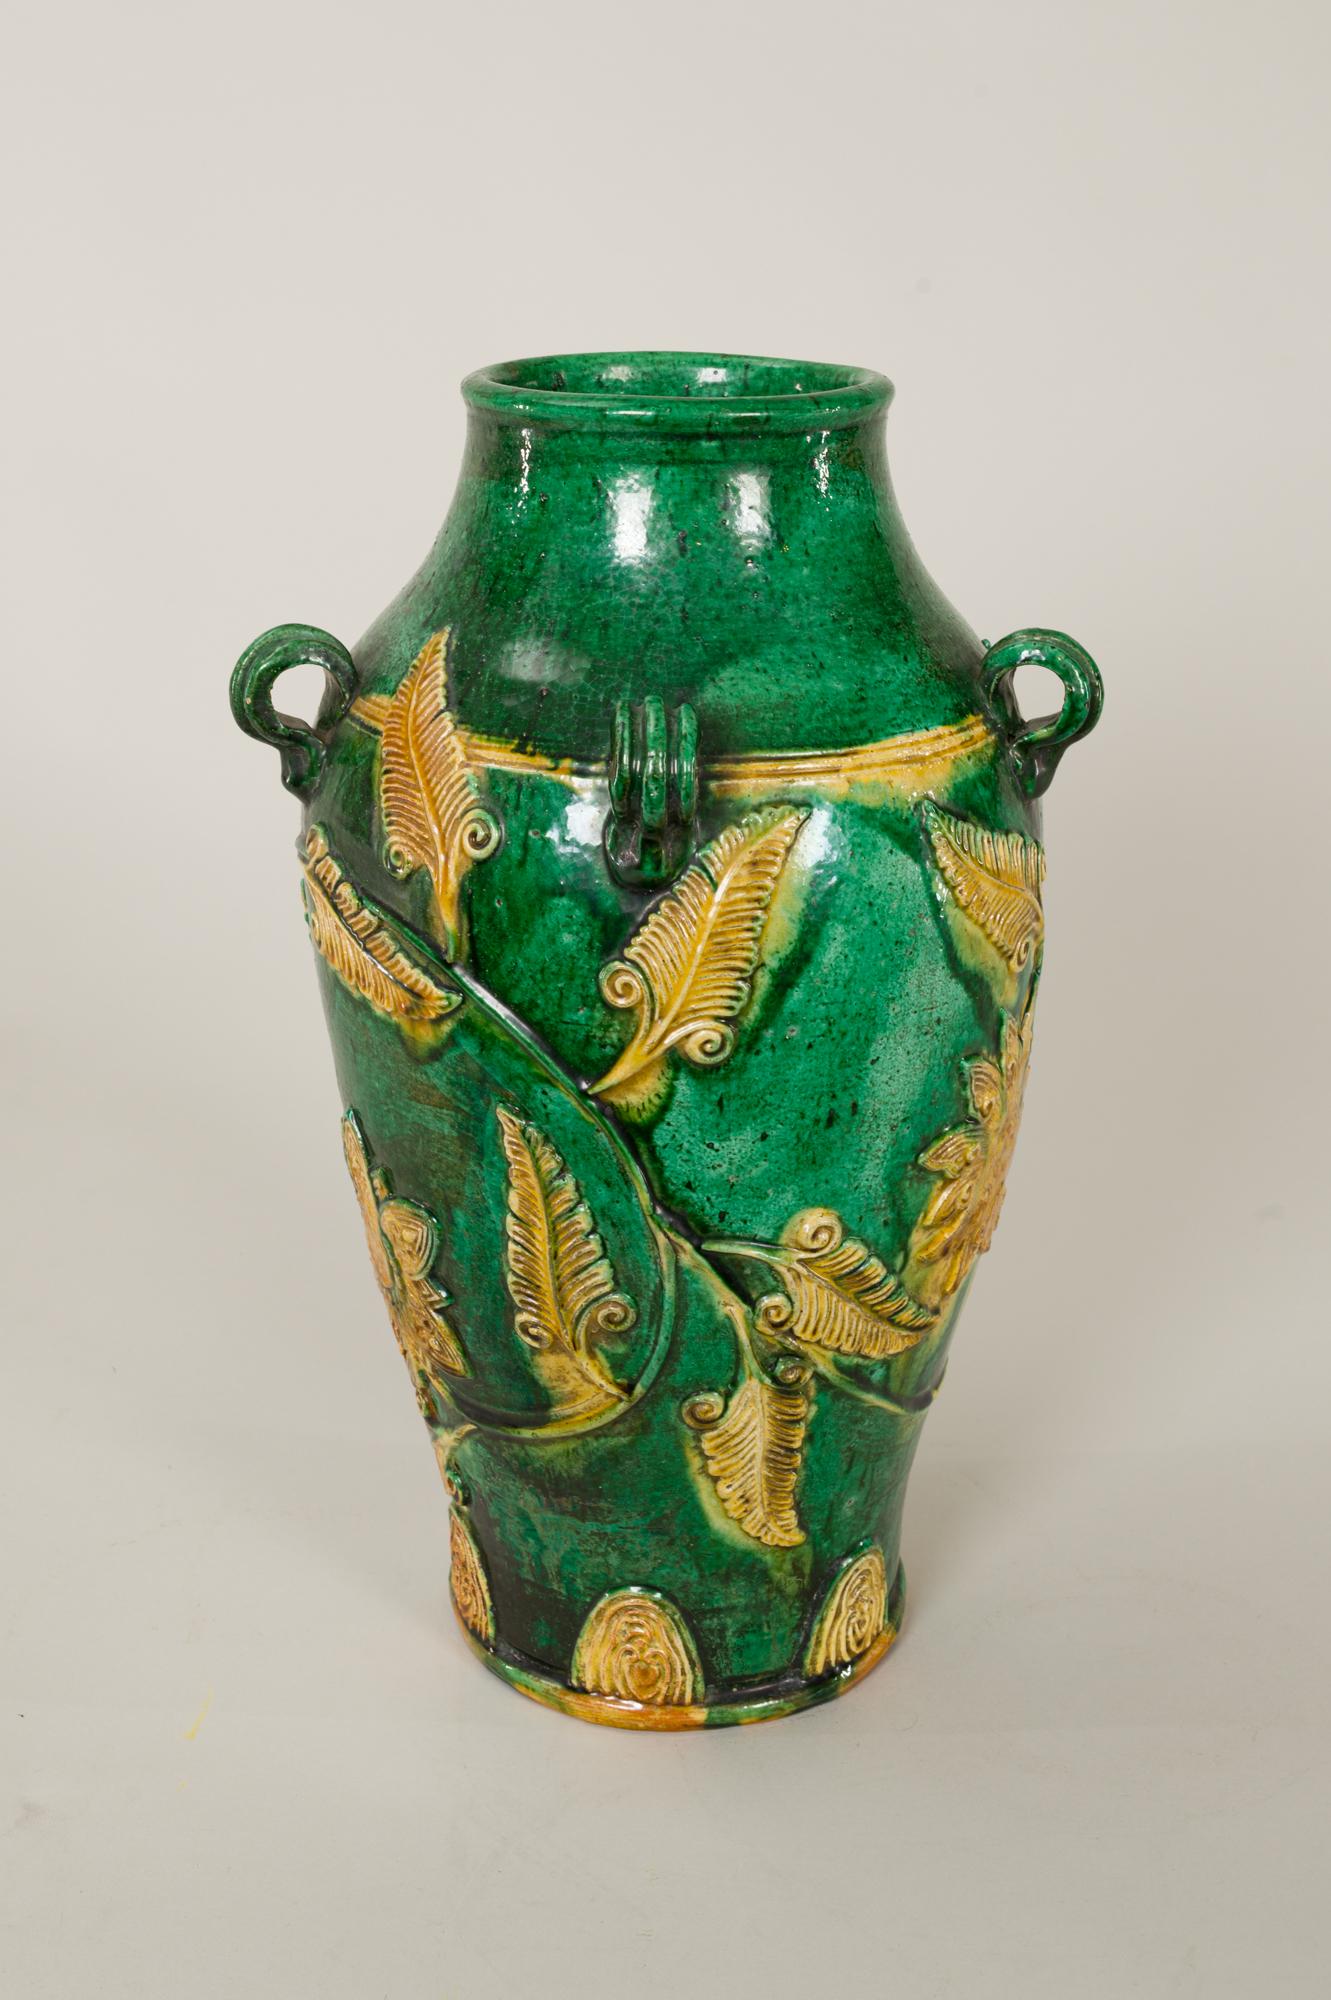 18th century Japanese Gennai Ware vase, known for its bright coloring, Gennai Ware was produced by Hiraga Gennai (1728-1780), a scientist and intellectual who lived in what is now Shido, Kagawa Prefecture. Gennai Ware is stylistically similar to